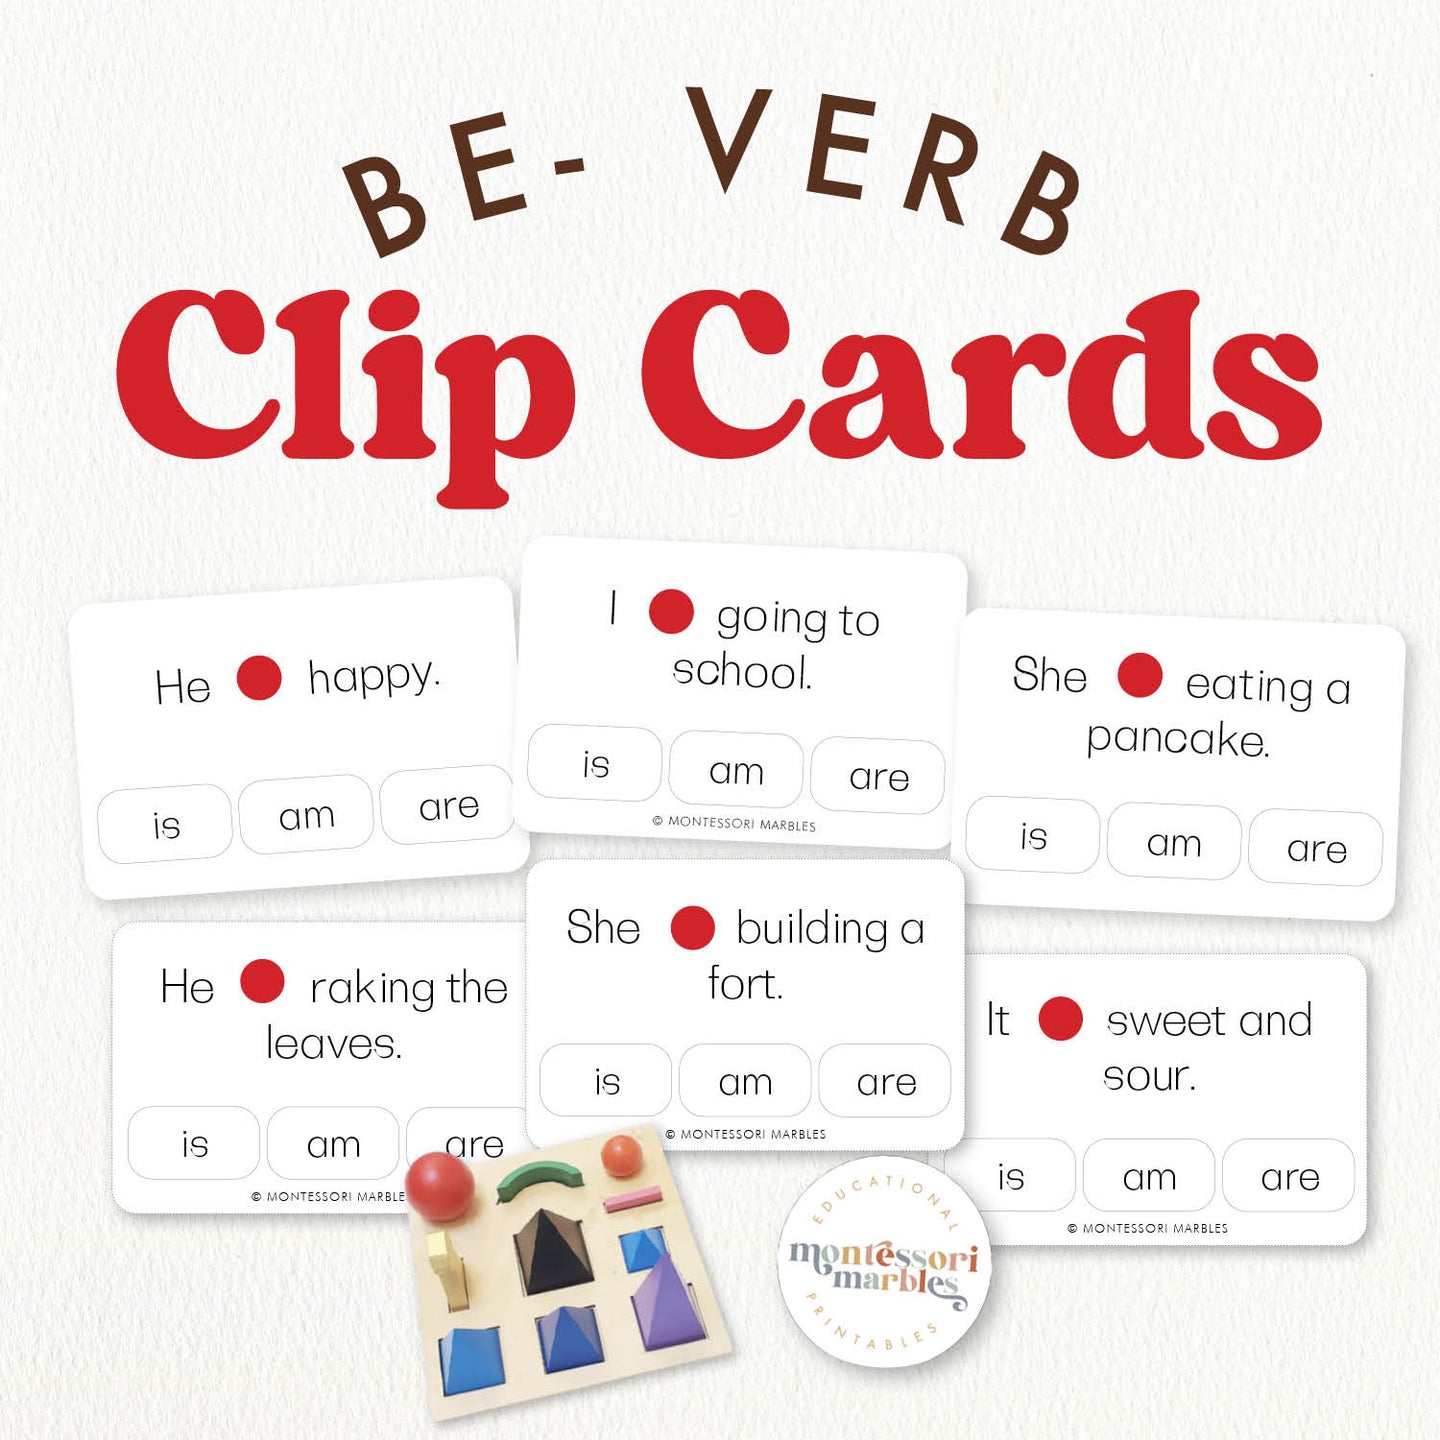 BE-Verb Clip Cards